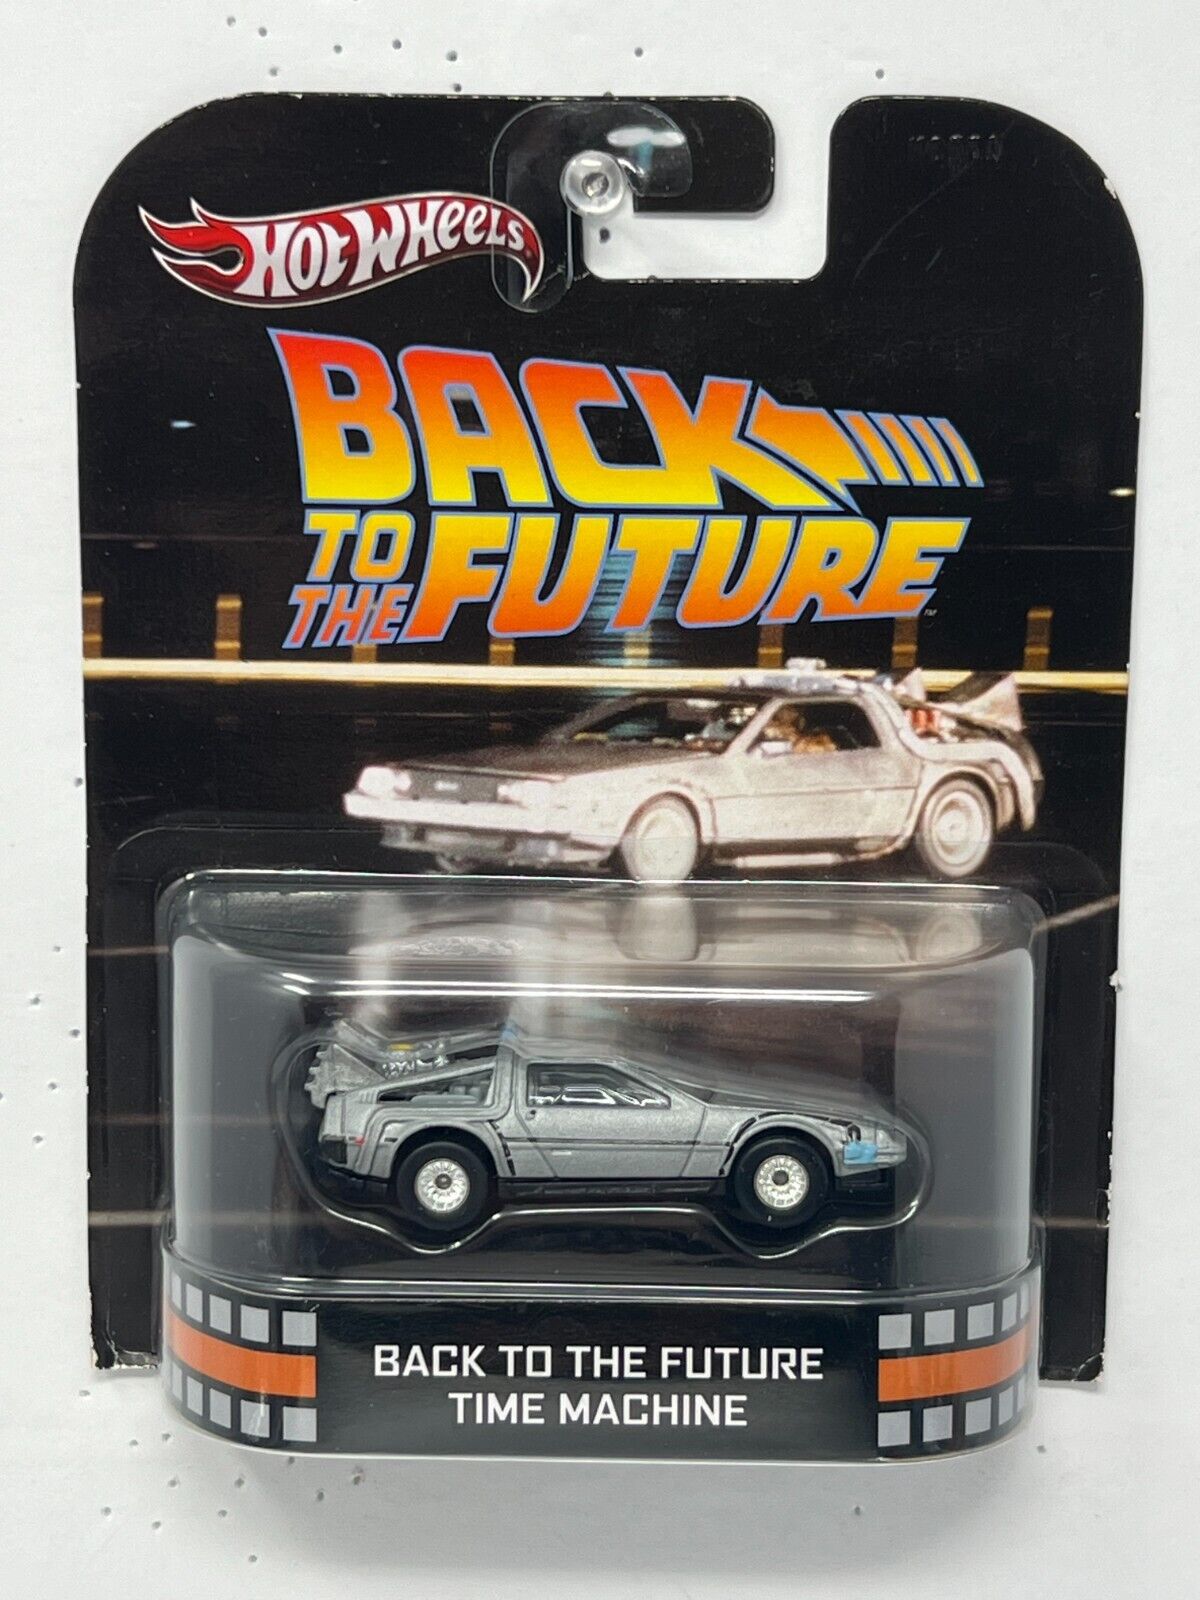 Hot Wheels Retro Entertainment Back to the Future Time Machine 1:64 Diecast